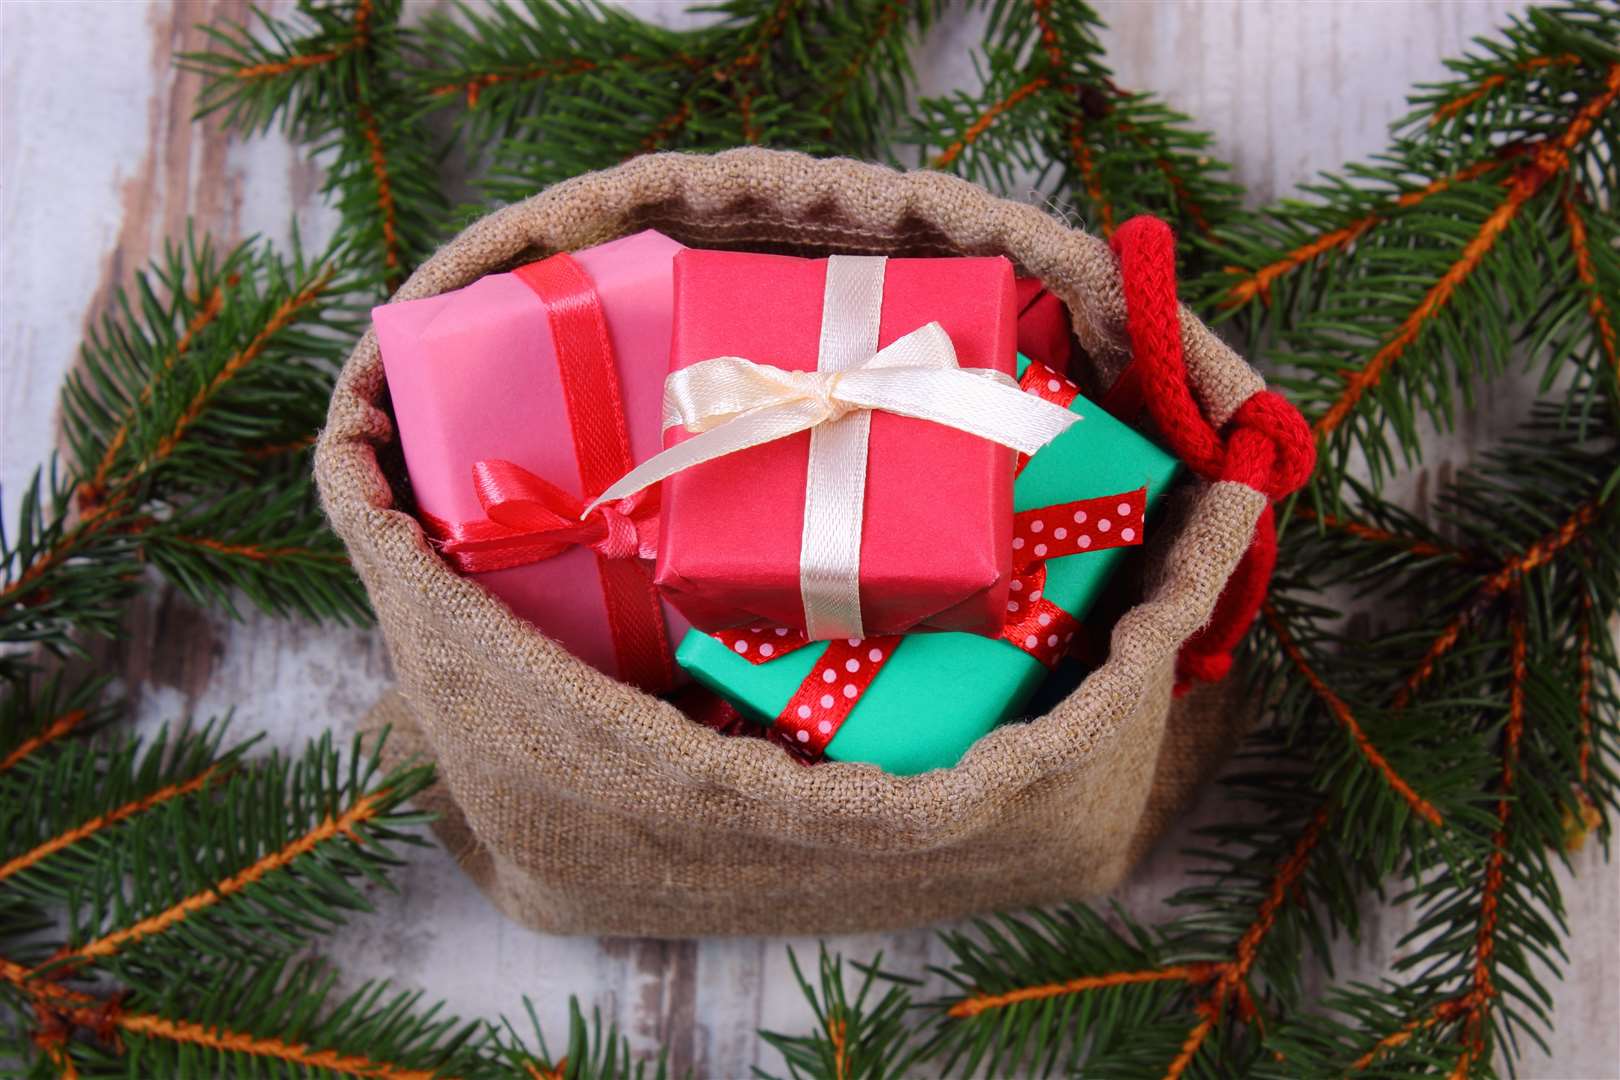 Wrapped colorful gifts for Christmas, birthday or other celebration in jute bag and spruce branches on old wooden white table